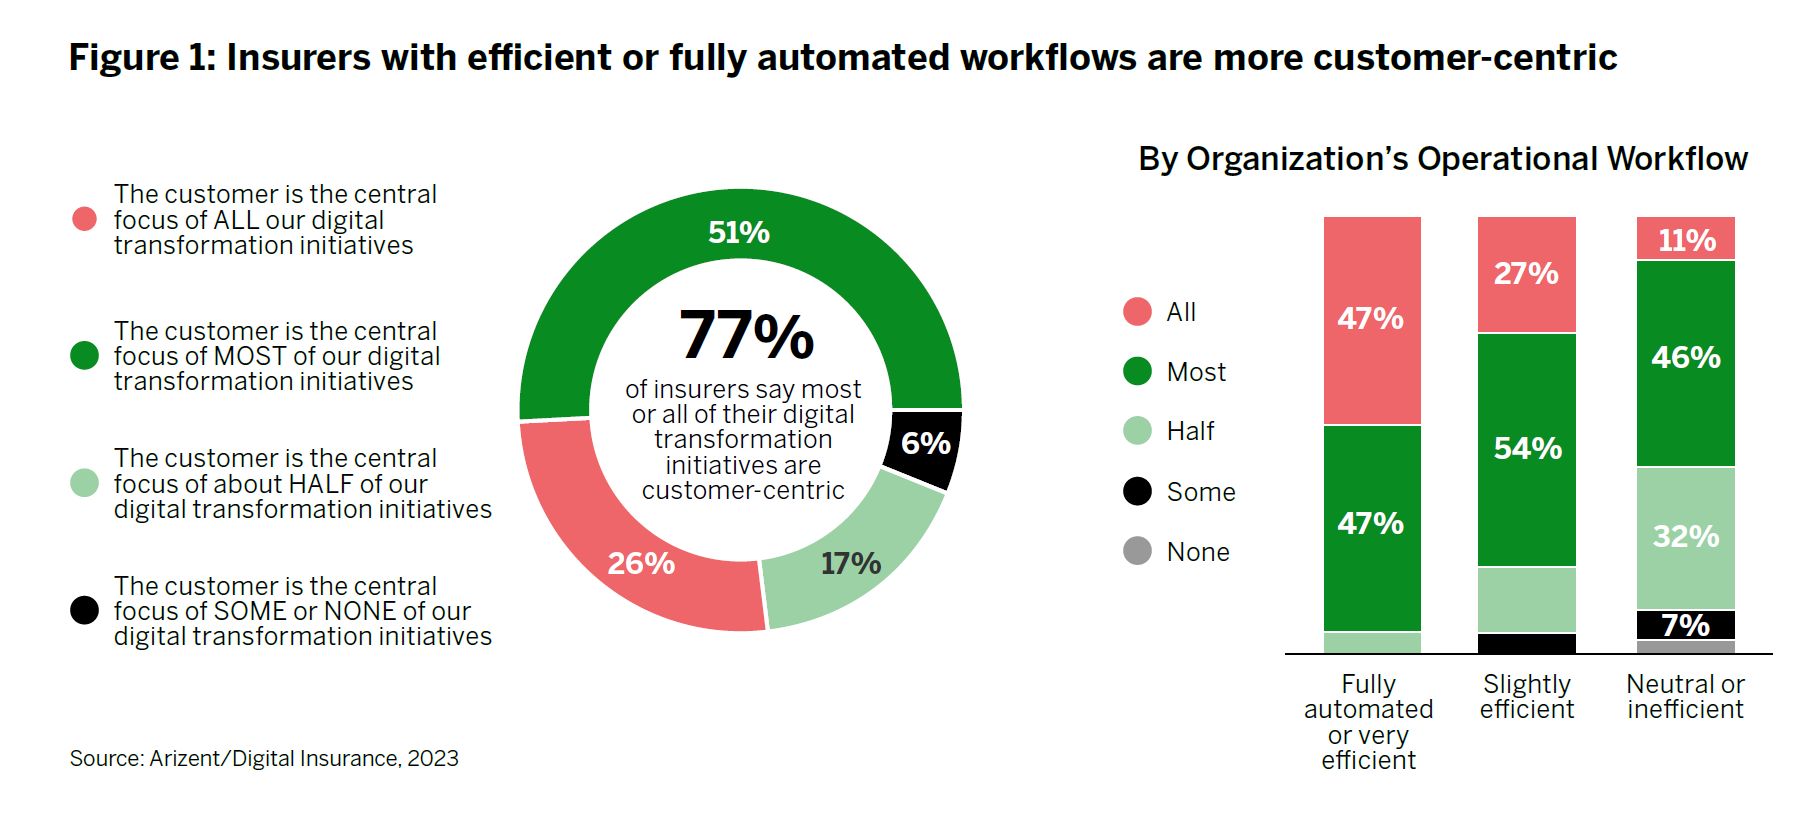 Figure 1: Data showing that insurers with efficient or fully automated workflows are more customer-centric.